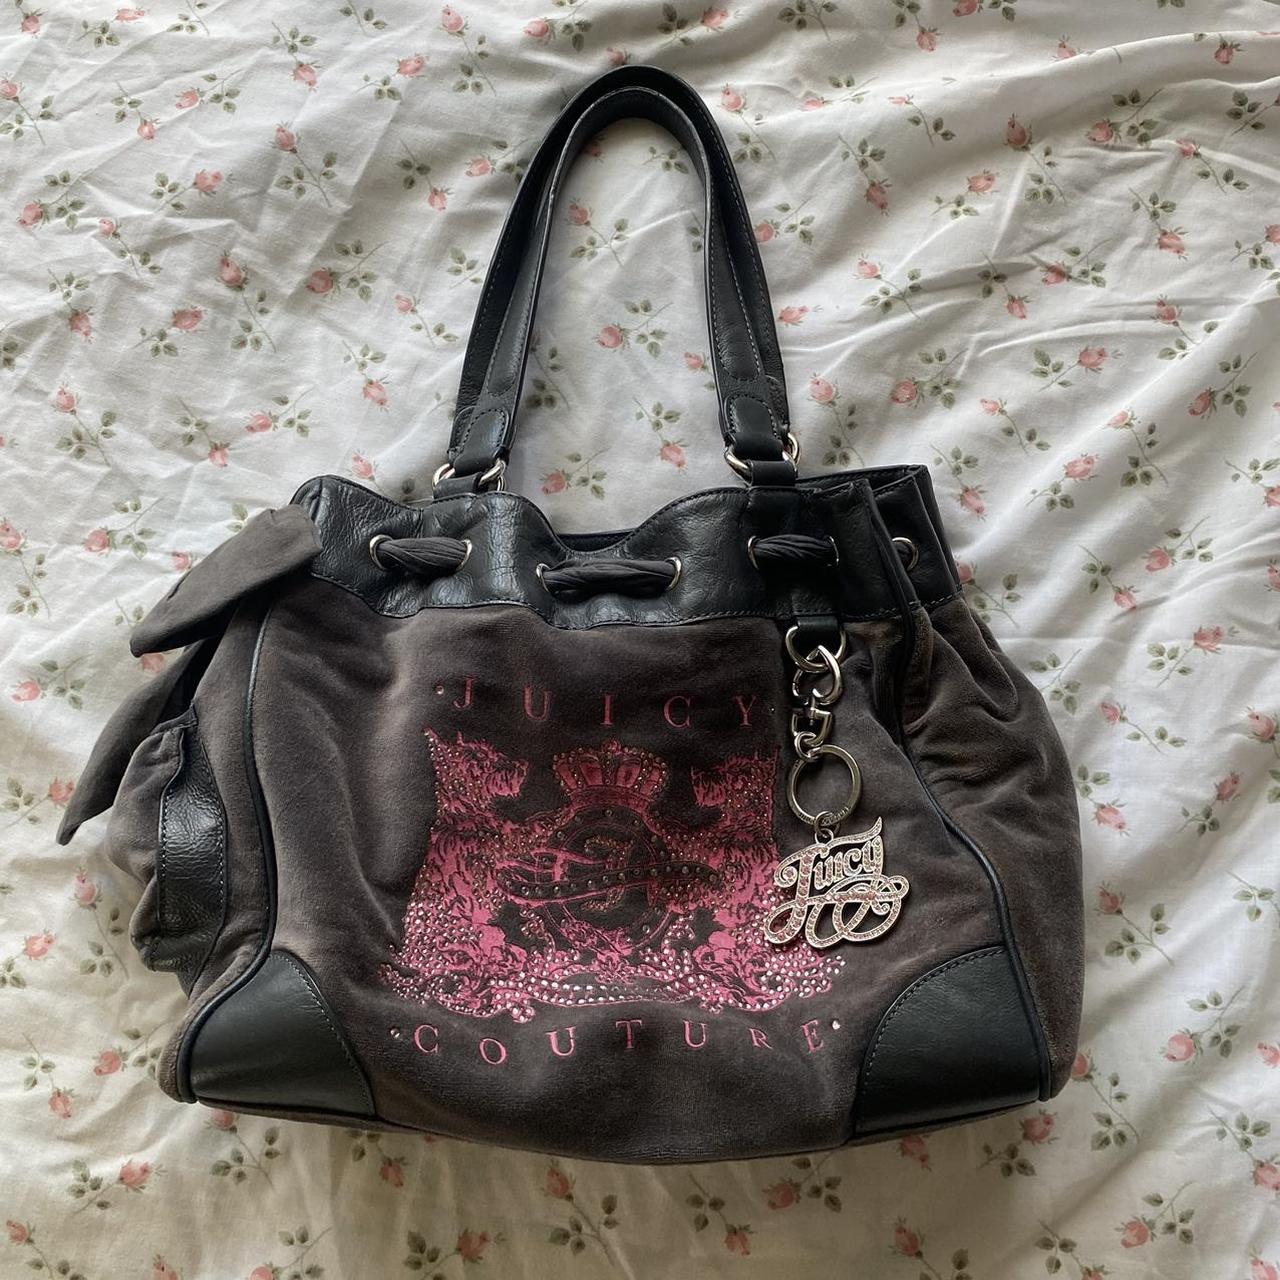 🌙 juicy couture day dreamer scottie bag - grey and... - Depop